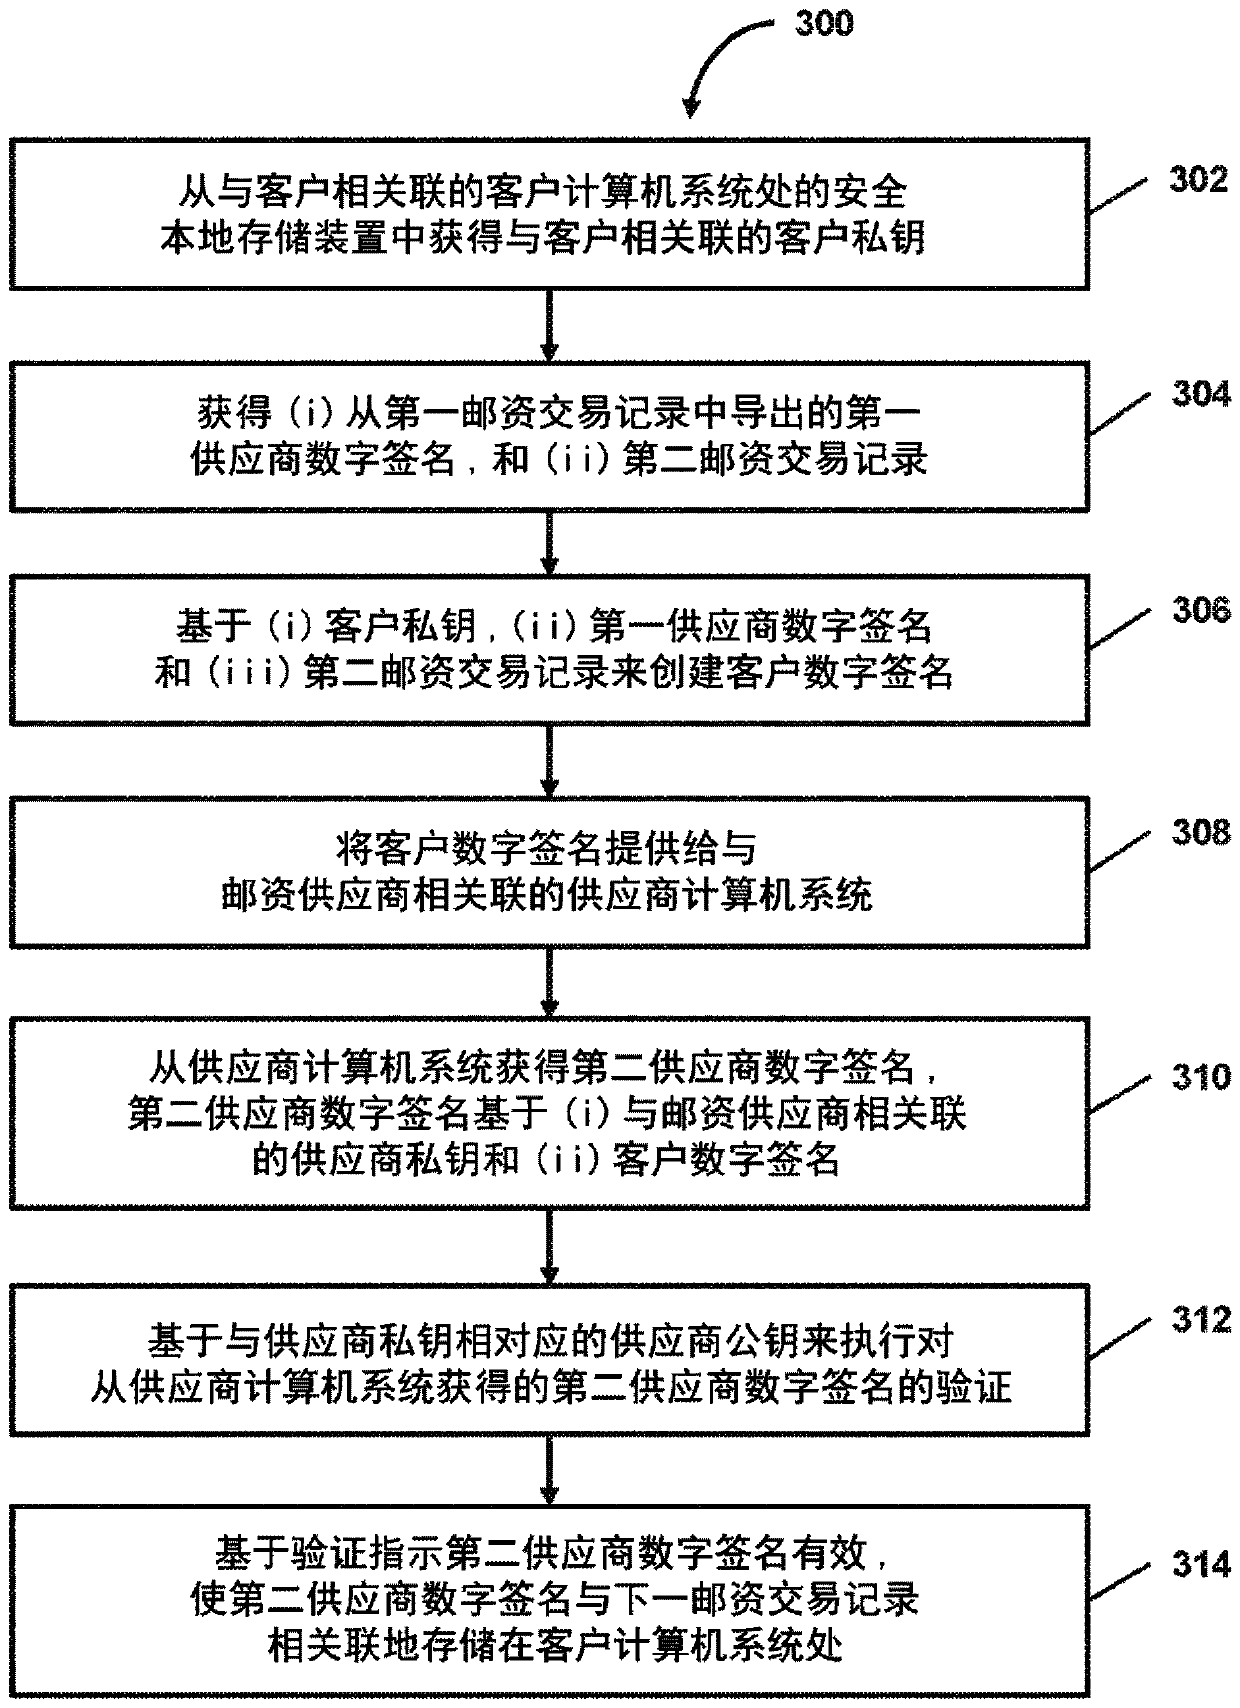 System and method for cryptographic-chain-based verification of postage transaction records